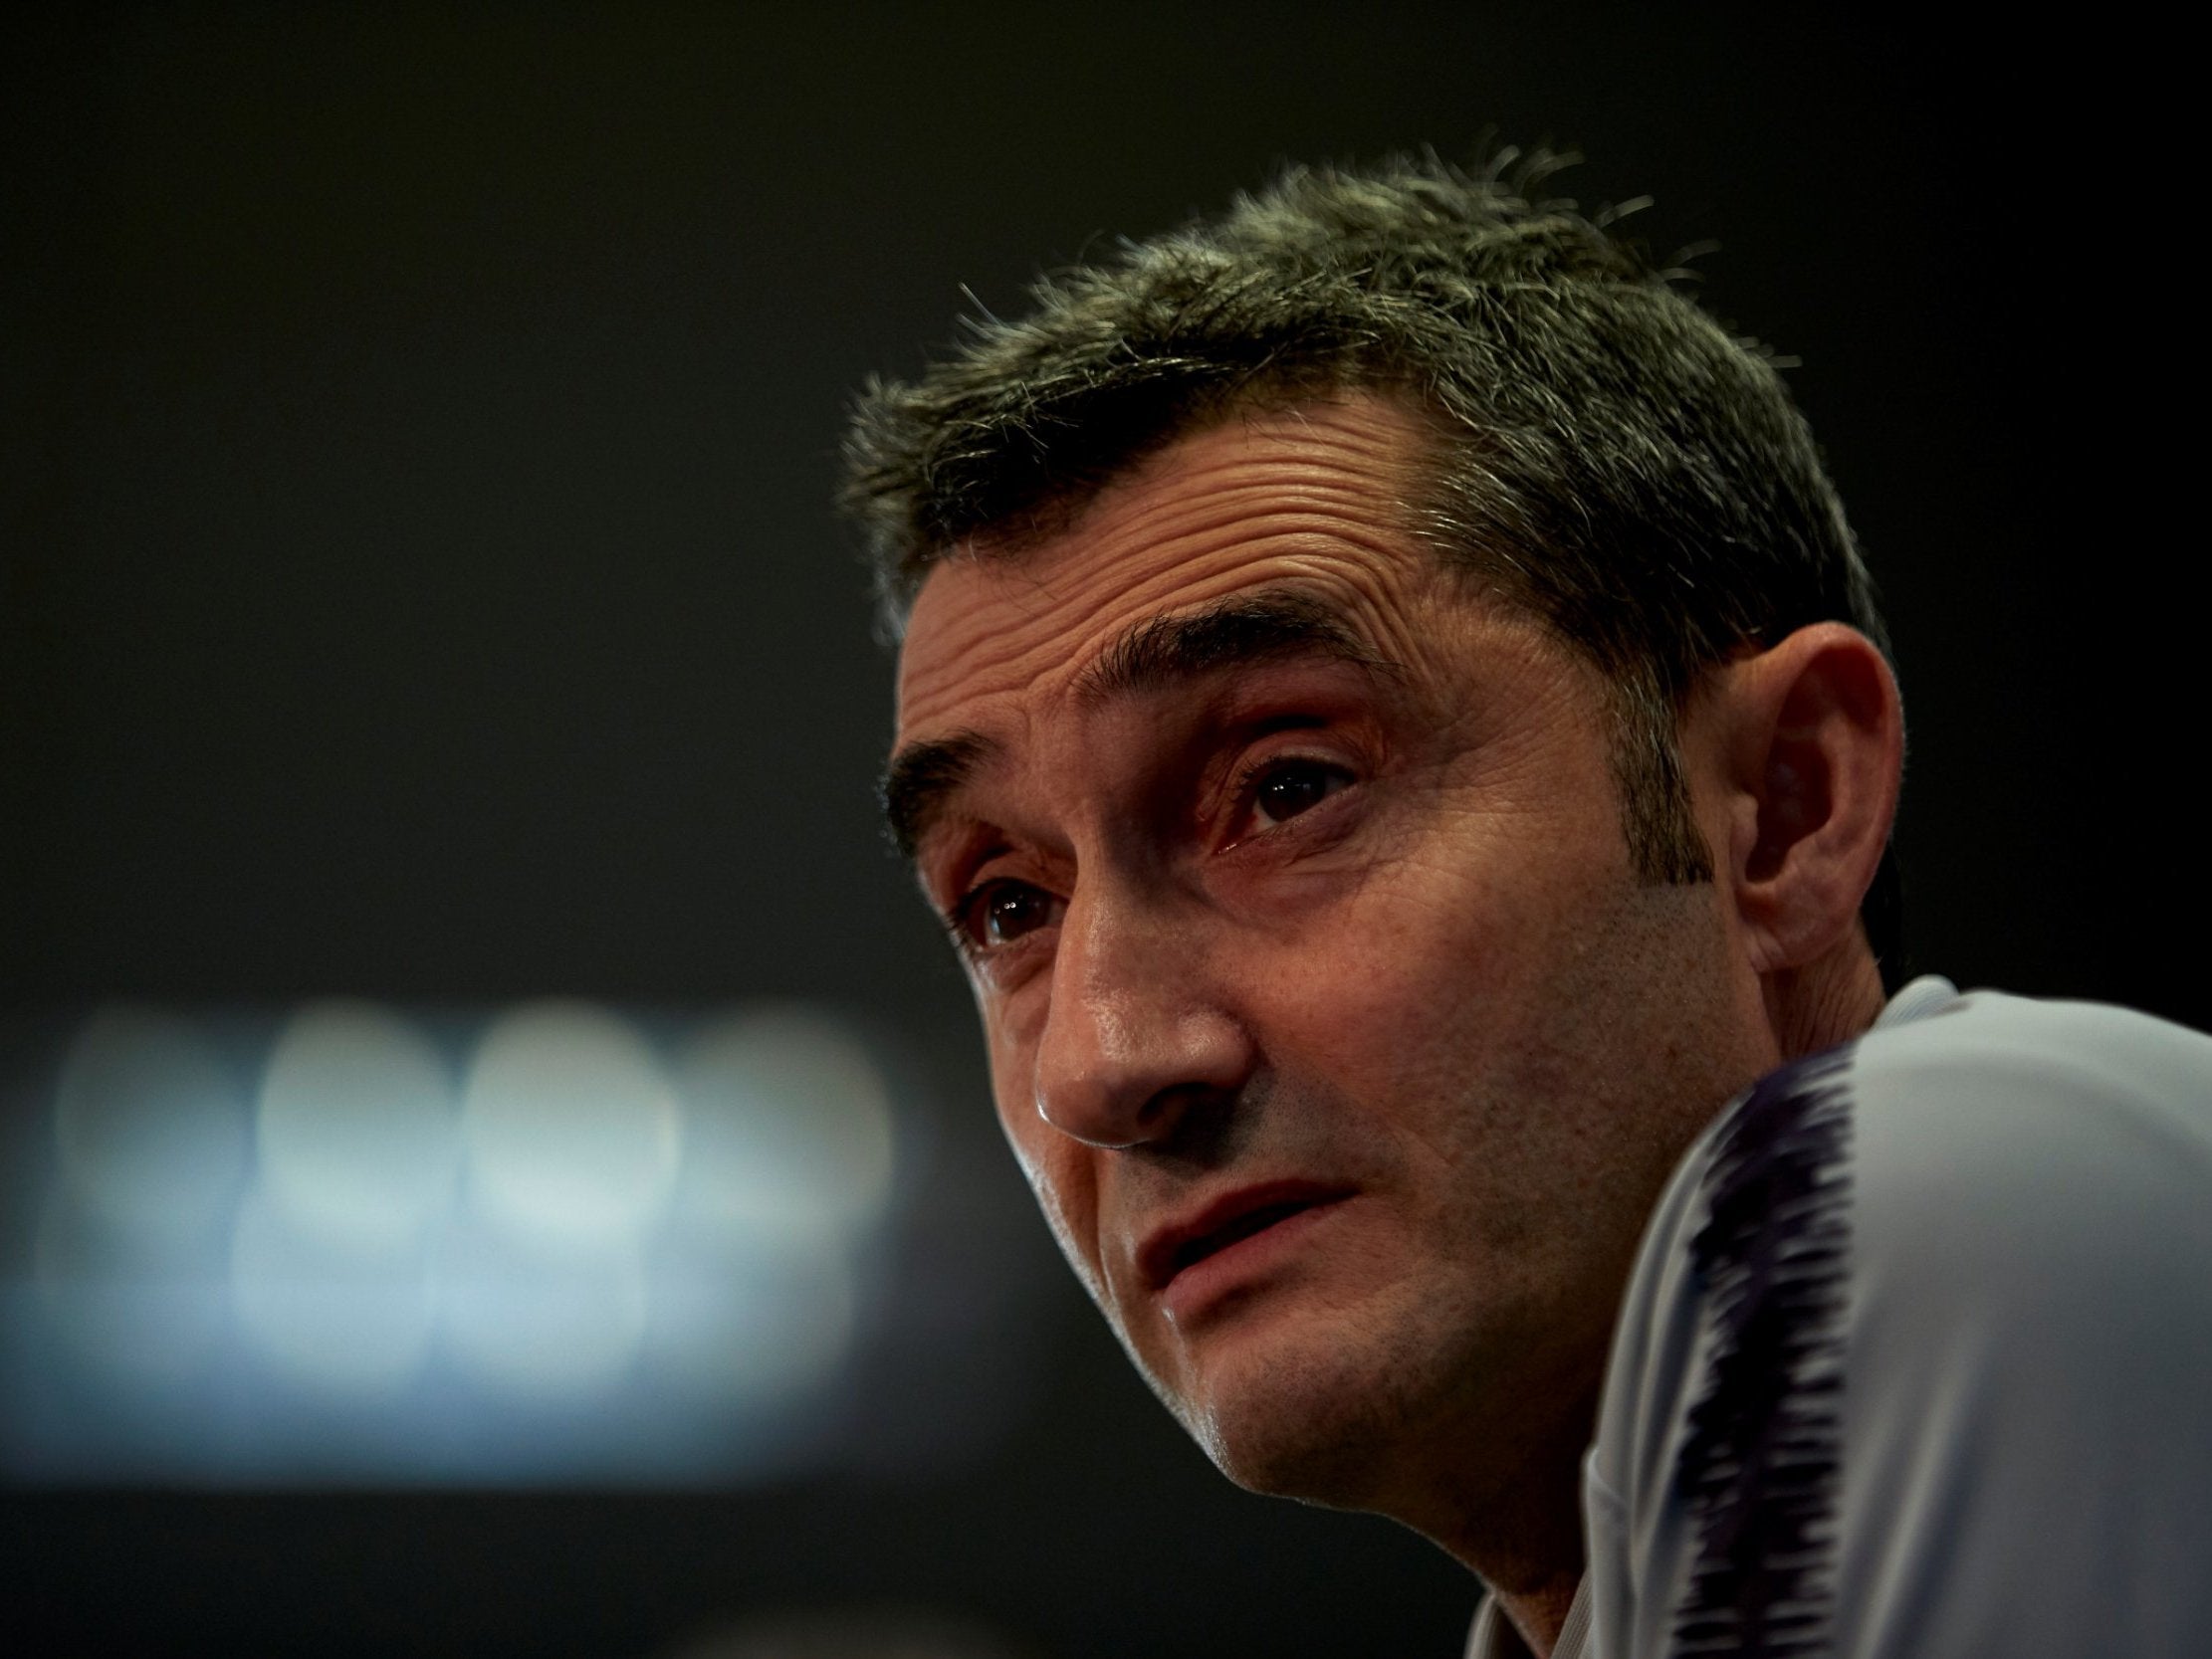 Valverde is looking forward to the challenge